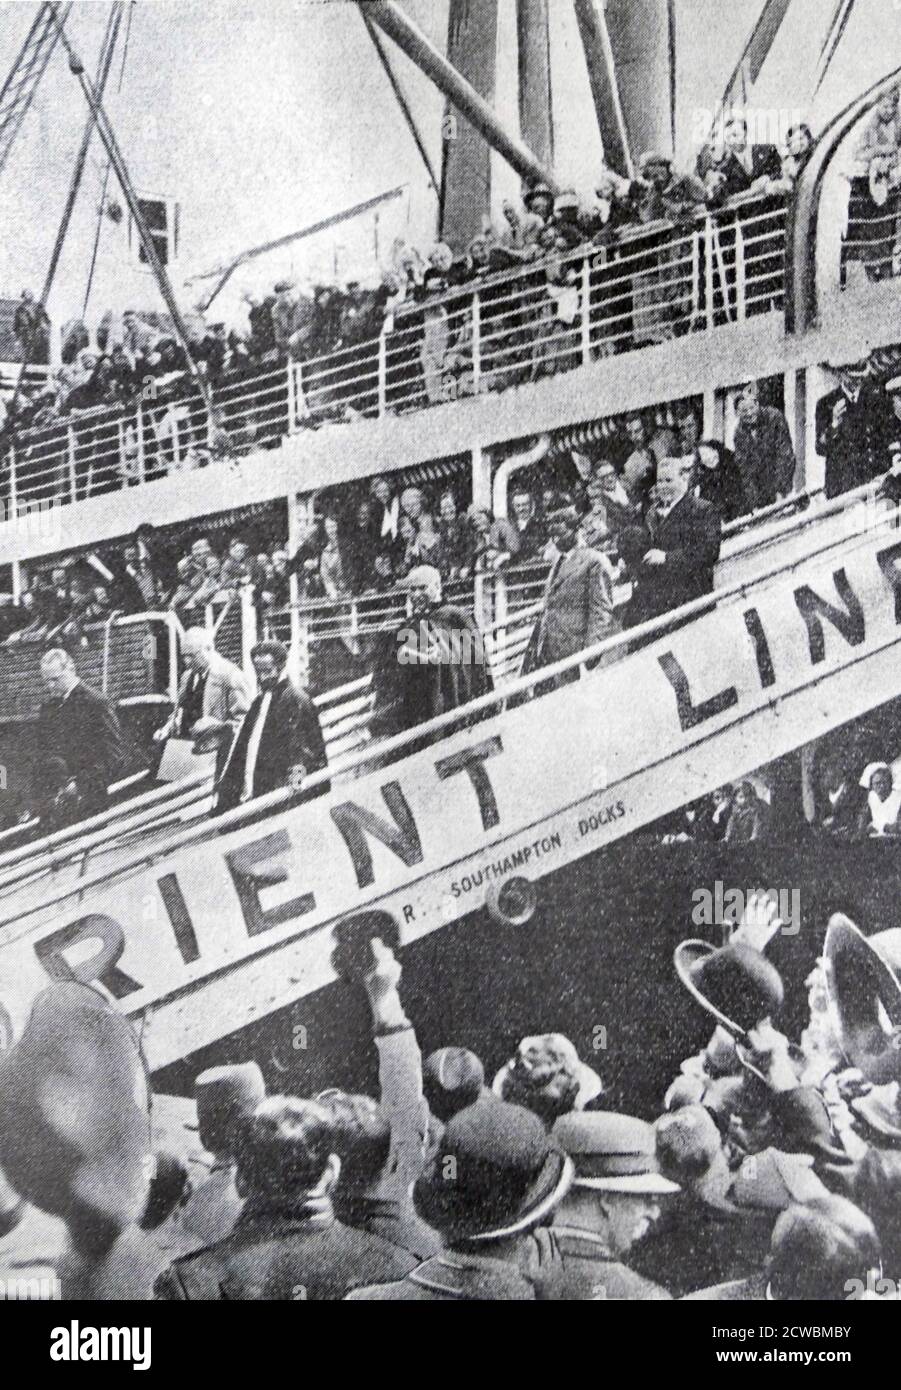 Black and white photo of the War in Ethiopia after the Italian invasion of 1935; Exiled Negus (emperor) Haile Selassie I (1892-1975) arrives in England, disembarking at Portsmouth to a joyous reception from the people. Stock Photo